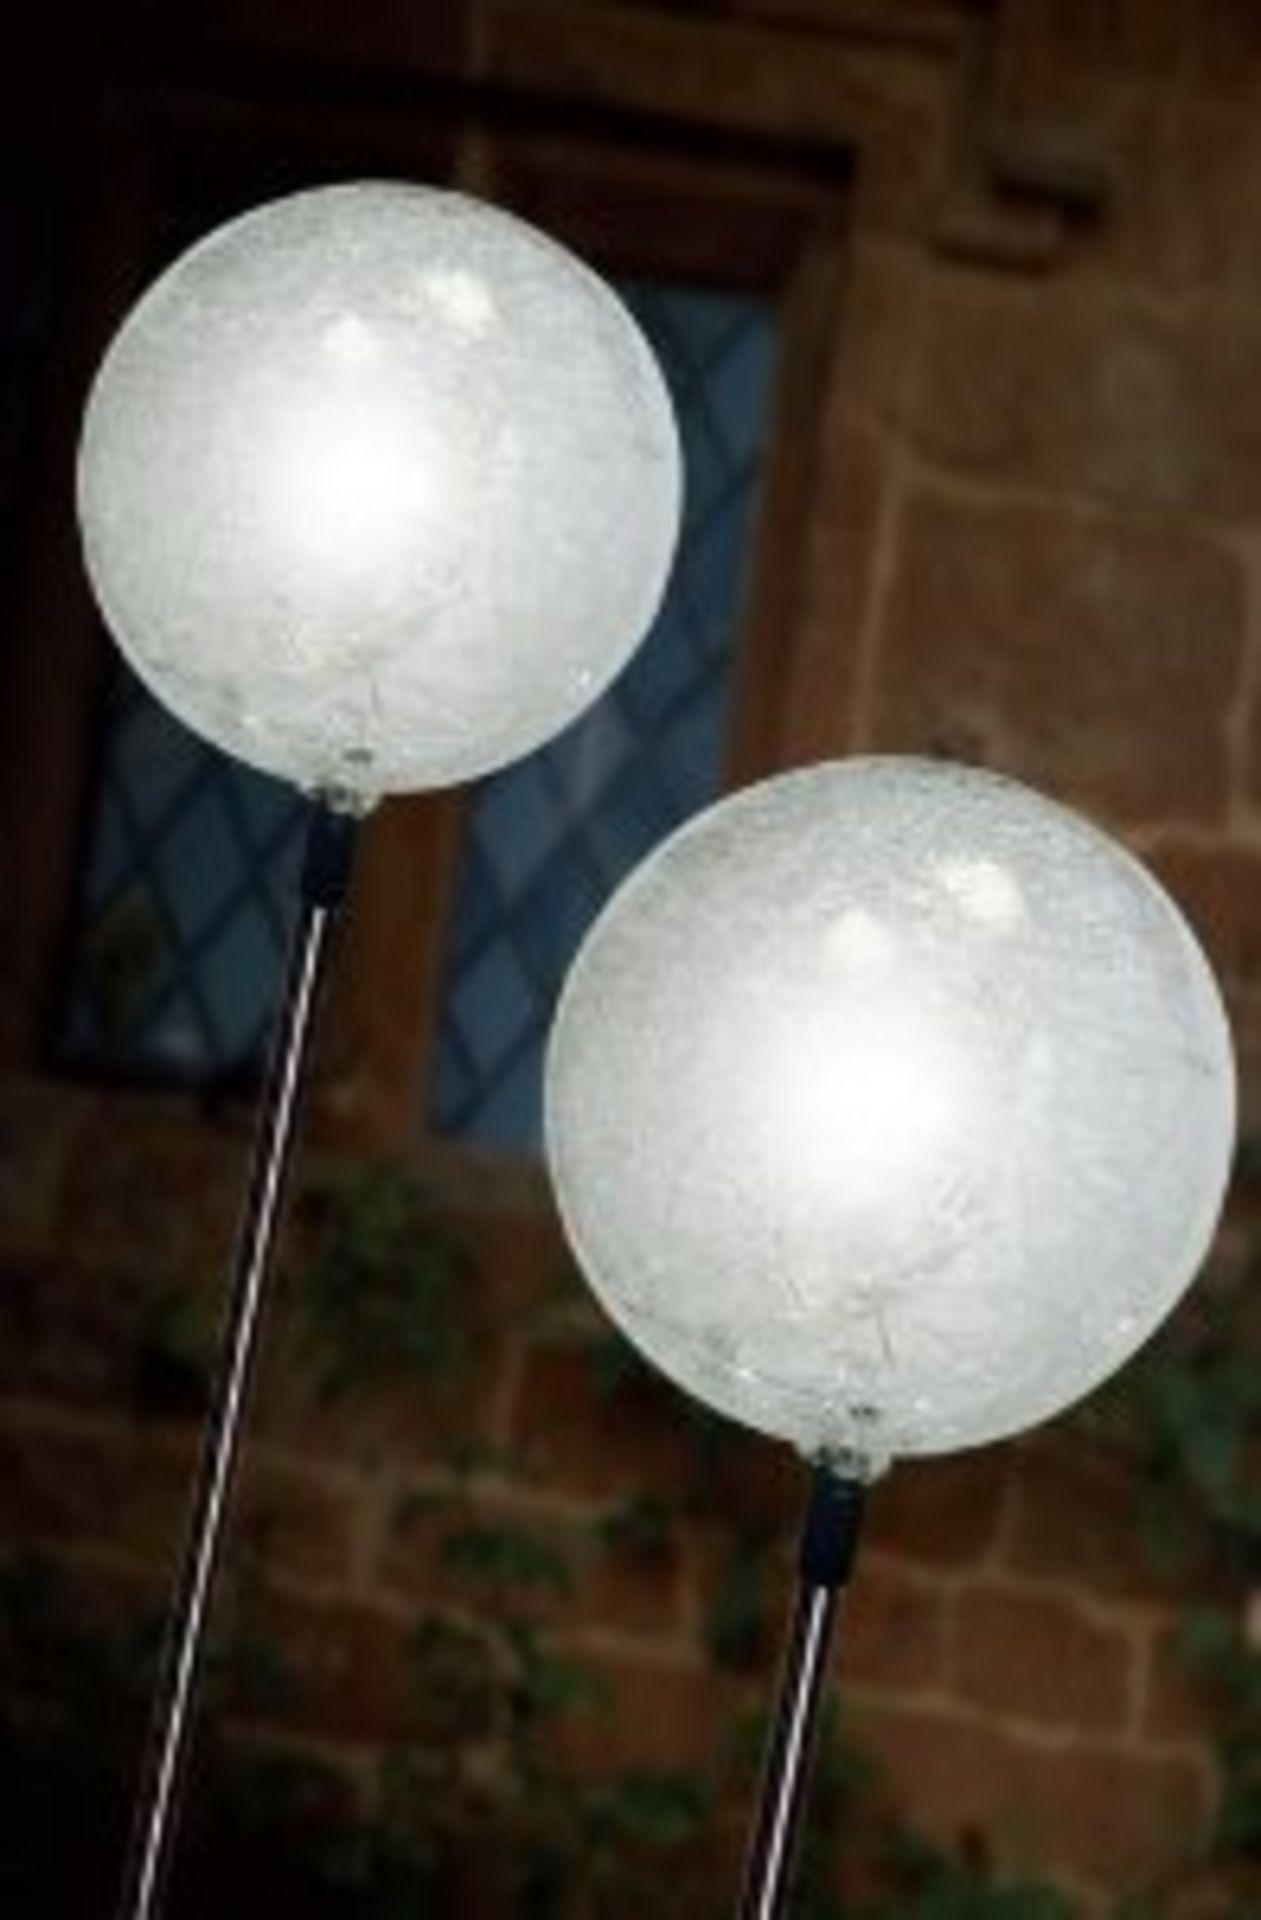 V Brand New Pack of Two Contemporary Globe Solar Lights - RRP £25.00 - with Crackled Glass Design on